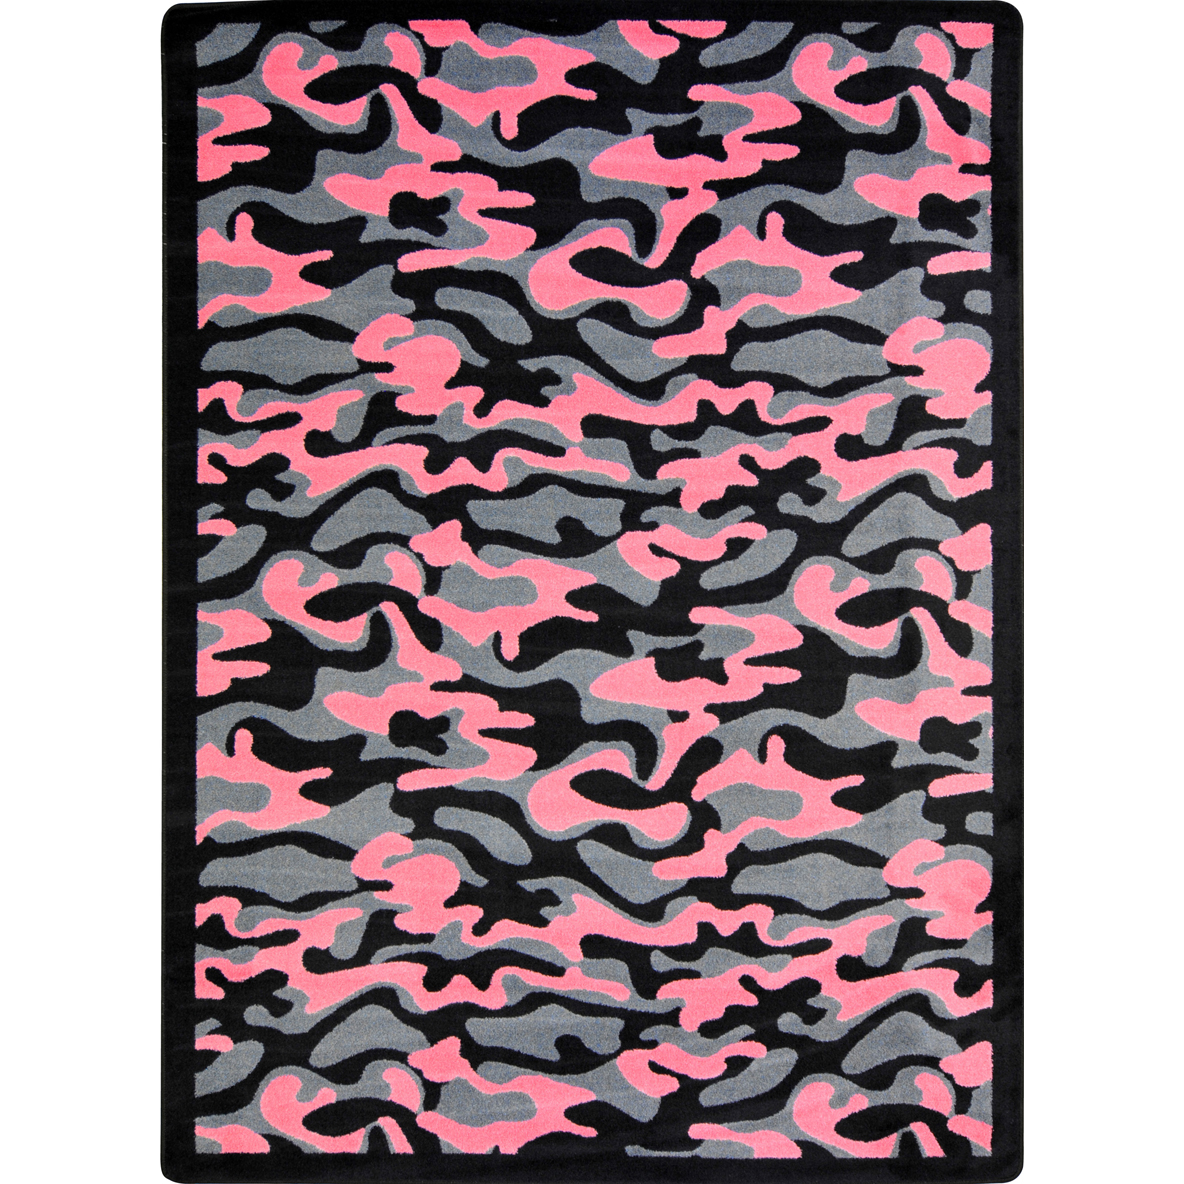 Dark Army Joy Carpets Kaleidoscope Funky Camo Whimsical Area Rugs 46-Inch by 64-Inch by 0.36-Inch 